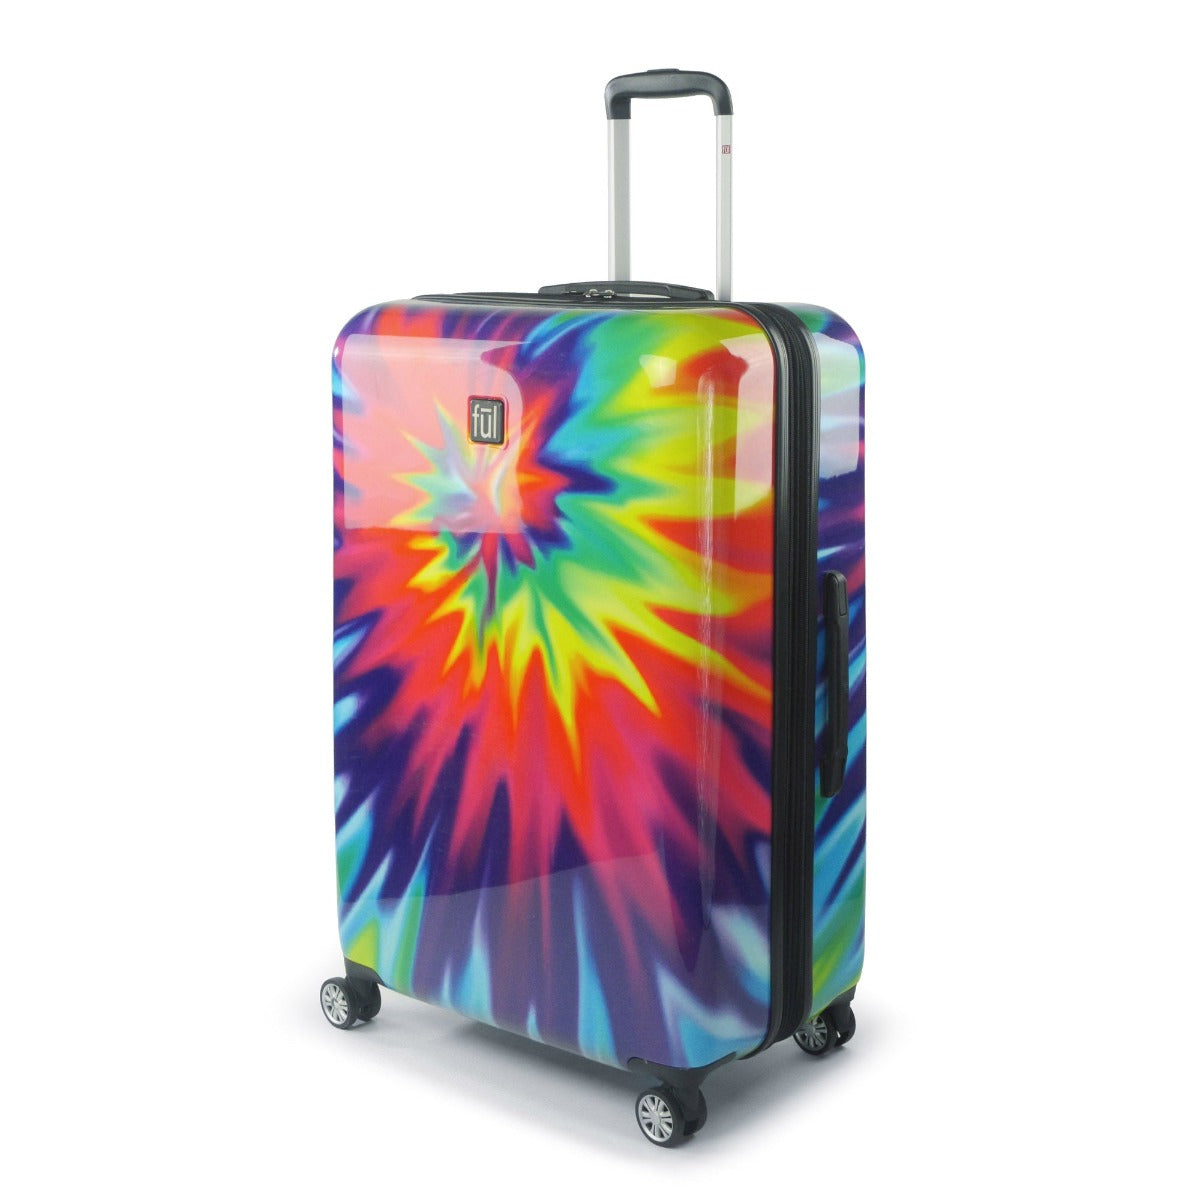 Ful Hard sided Tie dye rainbow swirl 28-inch spinner rolling suitcase checked luggage